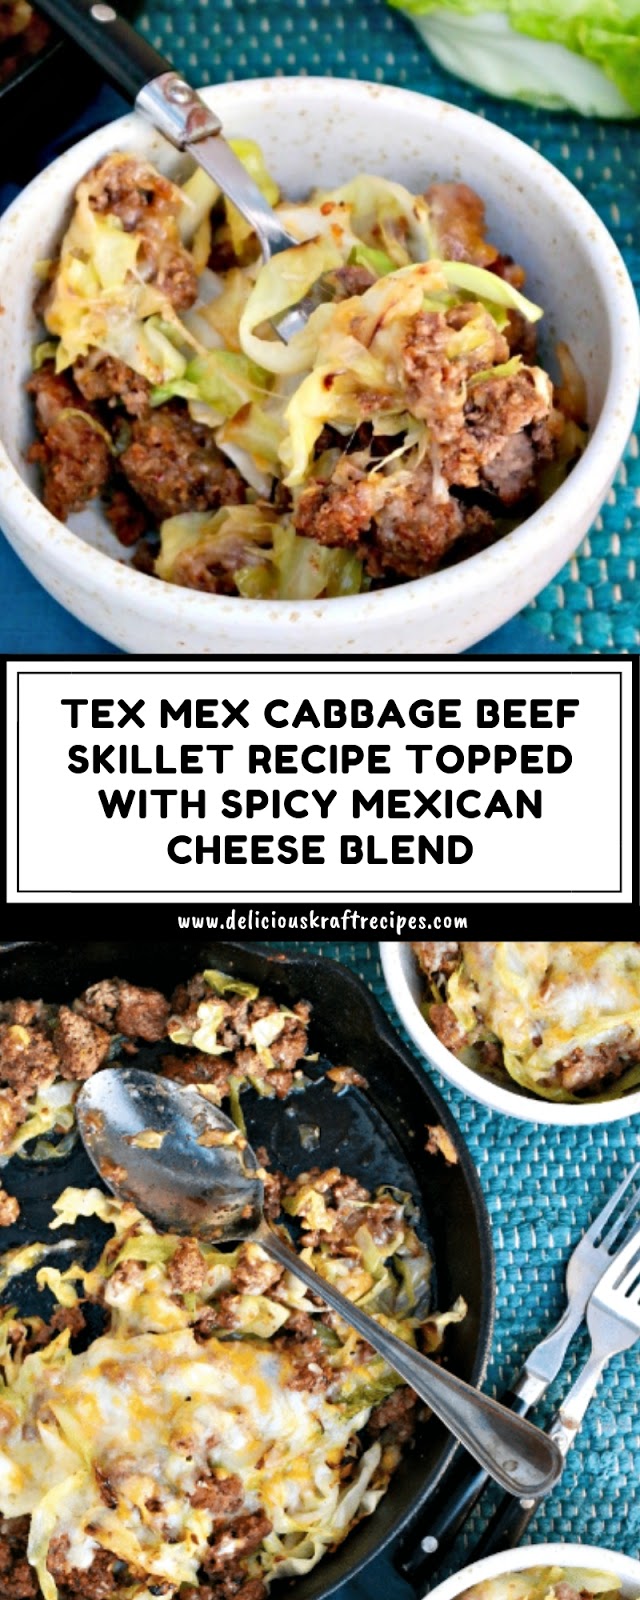 TEX MEX CABBAGE BEEF SKILLET RECIPE TOPPED WITH SPICY MEXICAN CHEESE BLEND